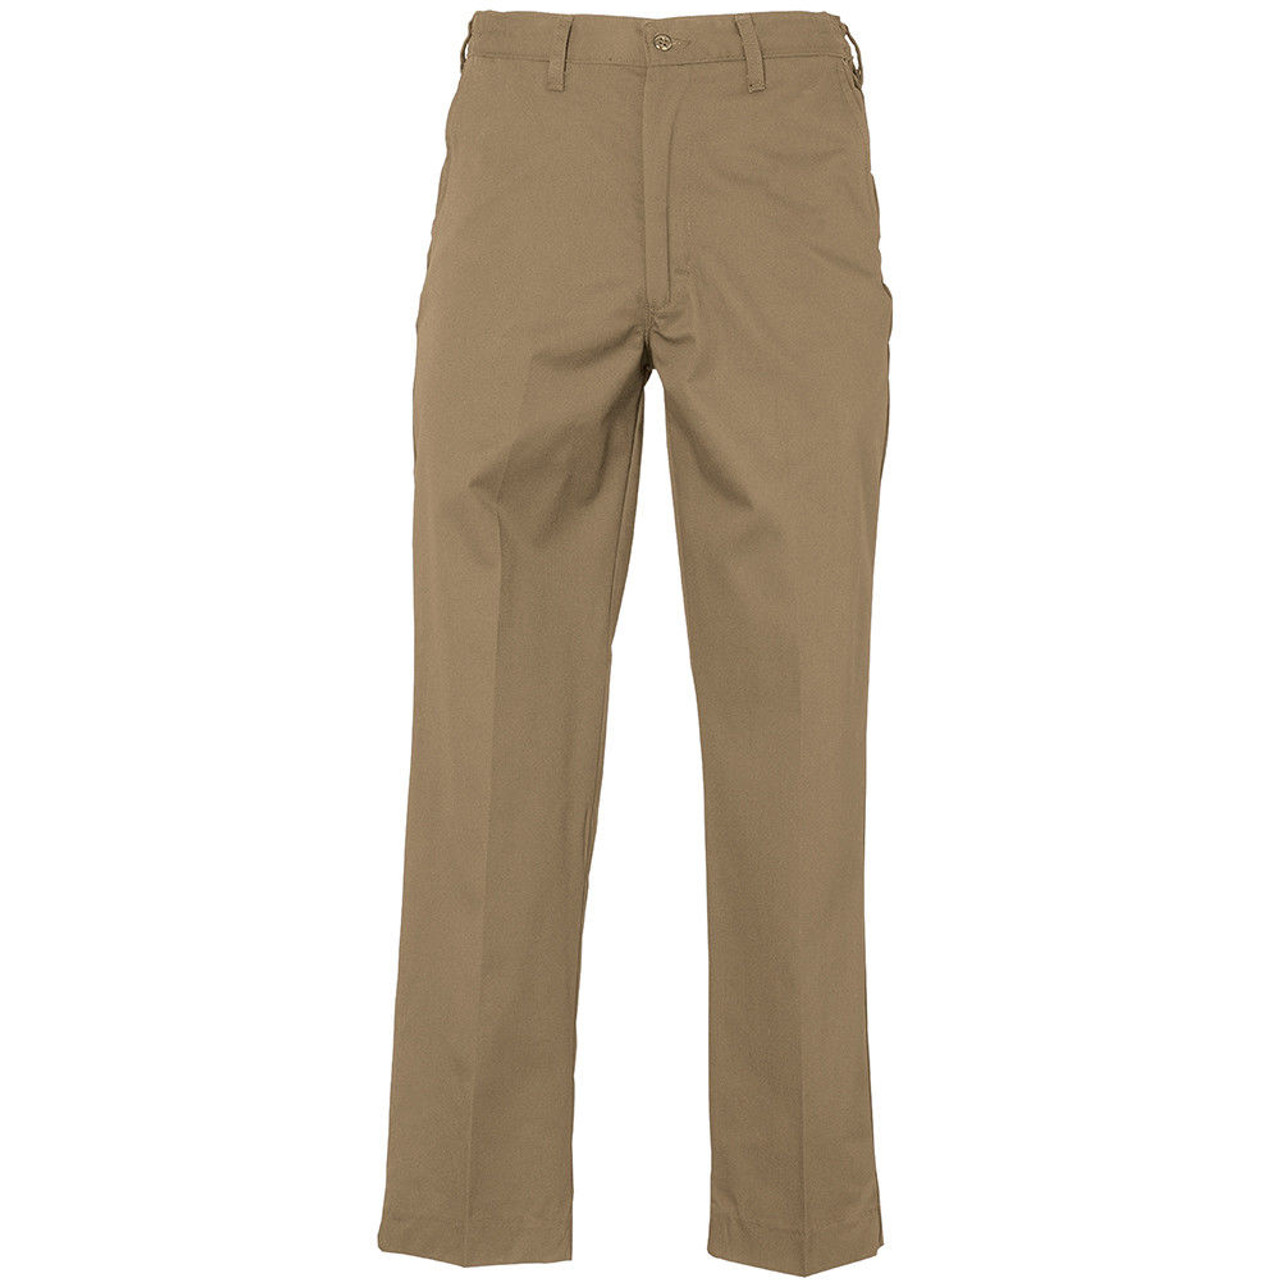 Mountain Khakis Alpine Utility Pant from Hiltons Tent City in Cambridge